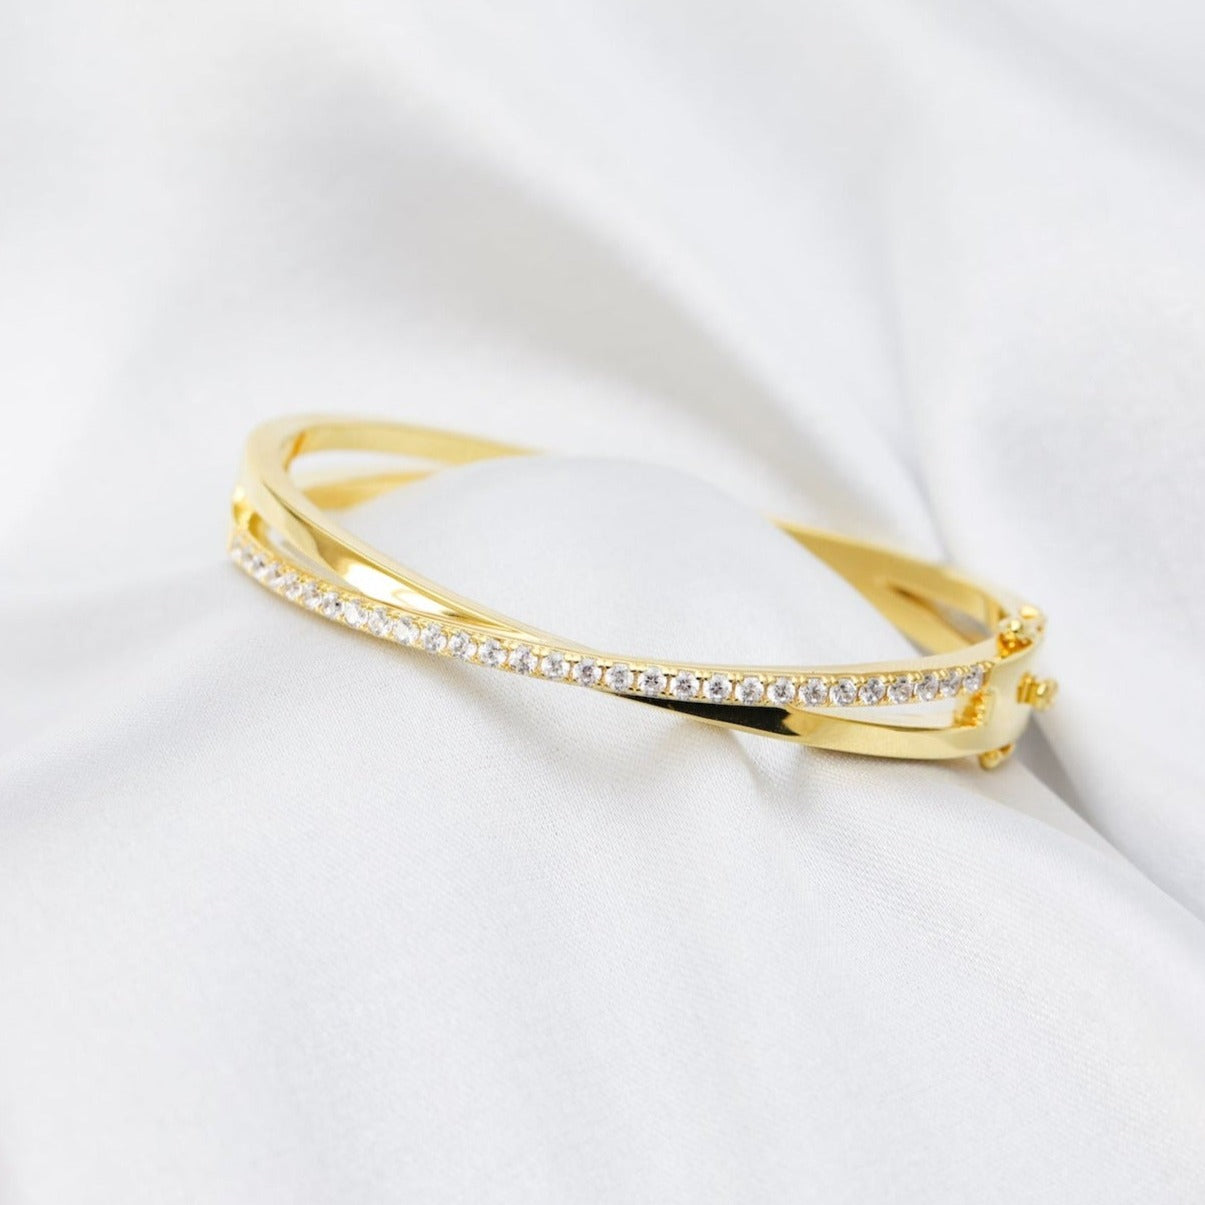 gold plated crossover bracelet with a row of sparkling cubic zirconia stone